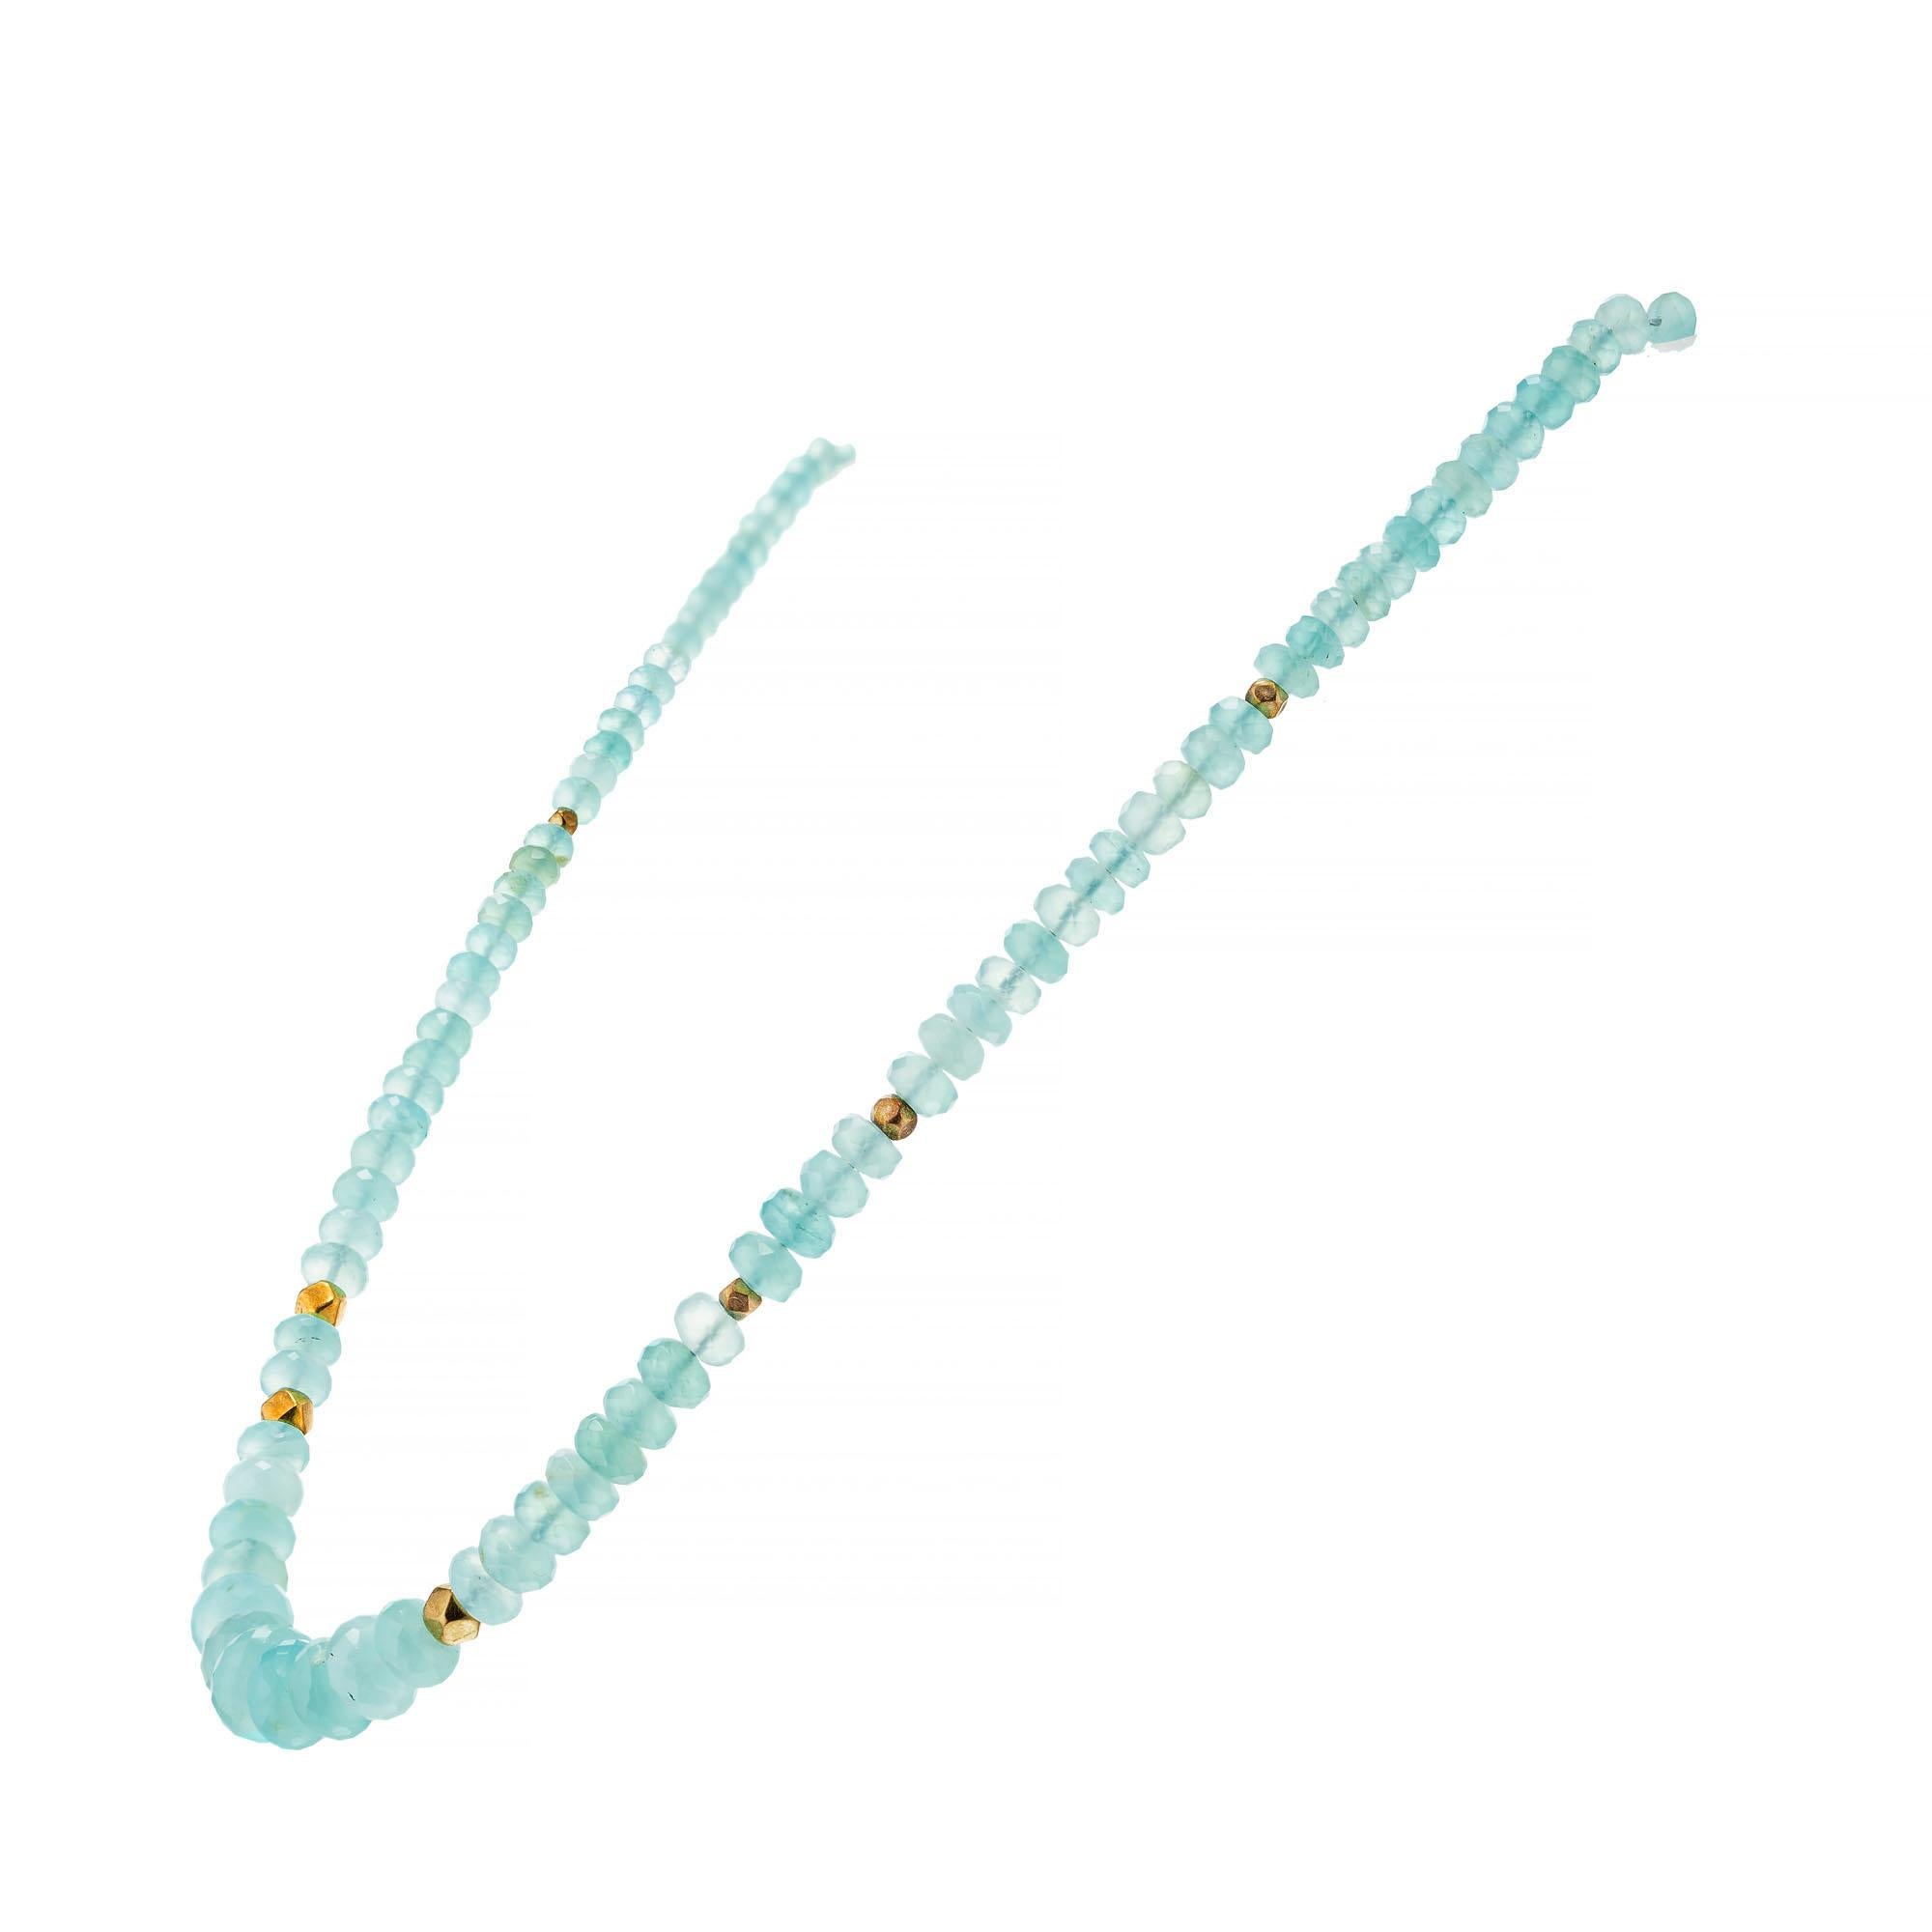 Robin Rotenier appetite bead necklace with 18k yellow gold spacers and toggle clasp. 16.5 inches long. 

130 faceted greenish blue appetite beads 3.6mm -8.8mm
18k yellow gold 
Hallmark: RR
15.4 grams 
Total length: 16.5 Inches
